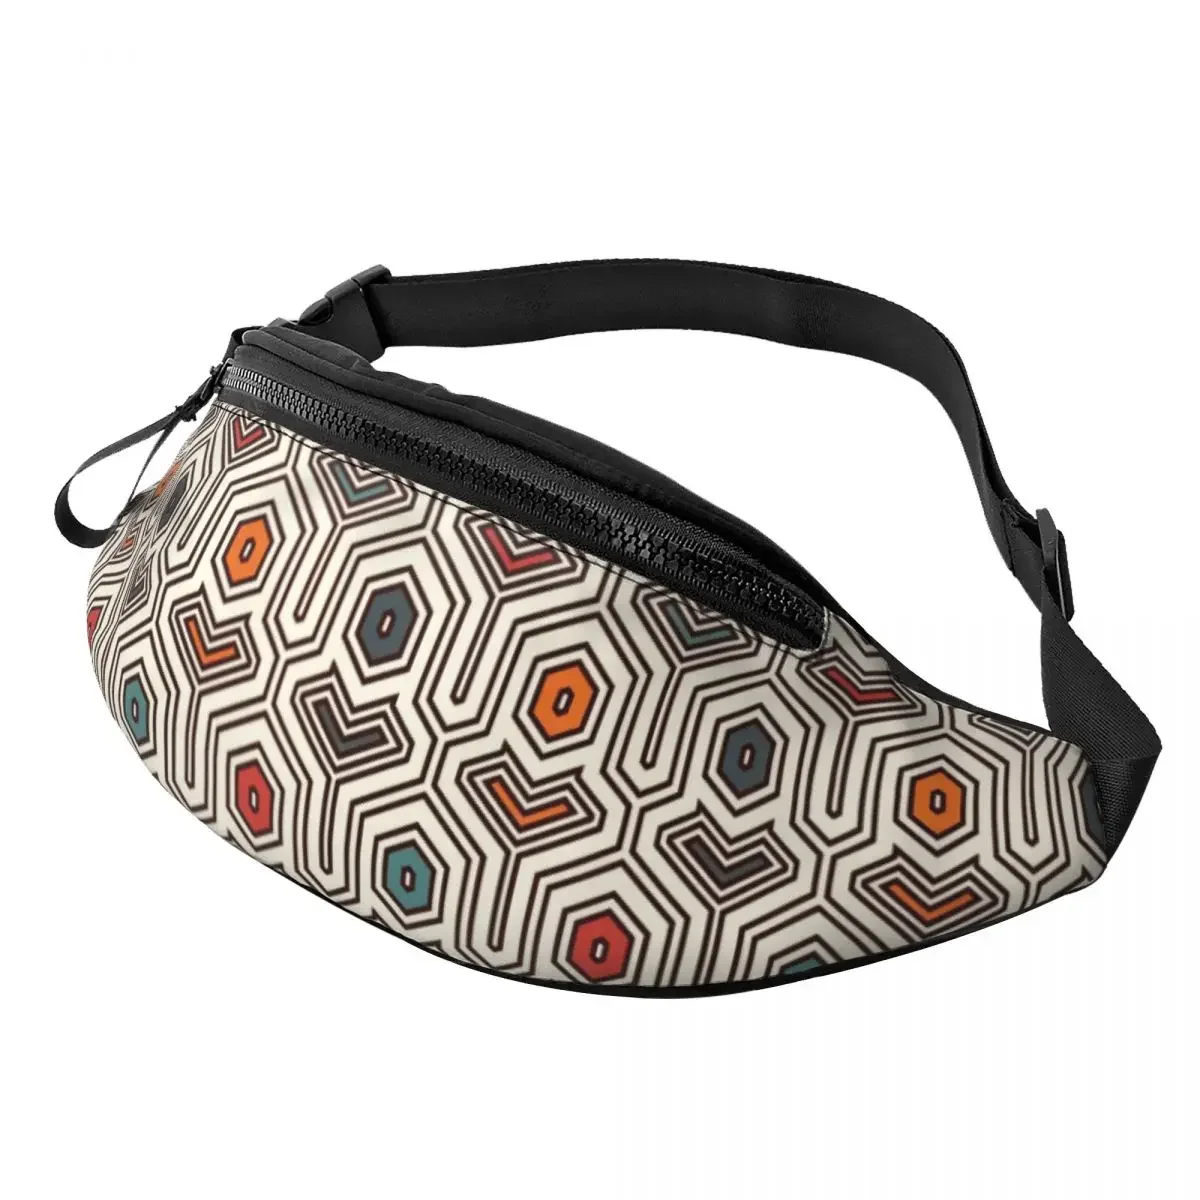 

Colorful Ankara Geometric Pattern Fanny Pack for Women Men Cool African Ethnic Crossbody Waist Bag Traveling Phone Money Pouch